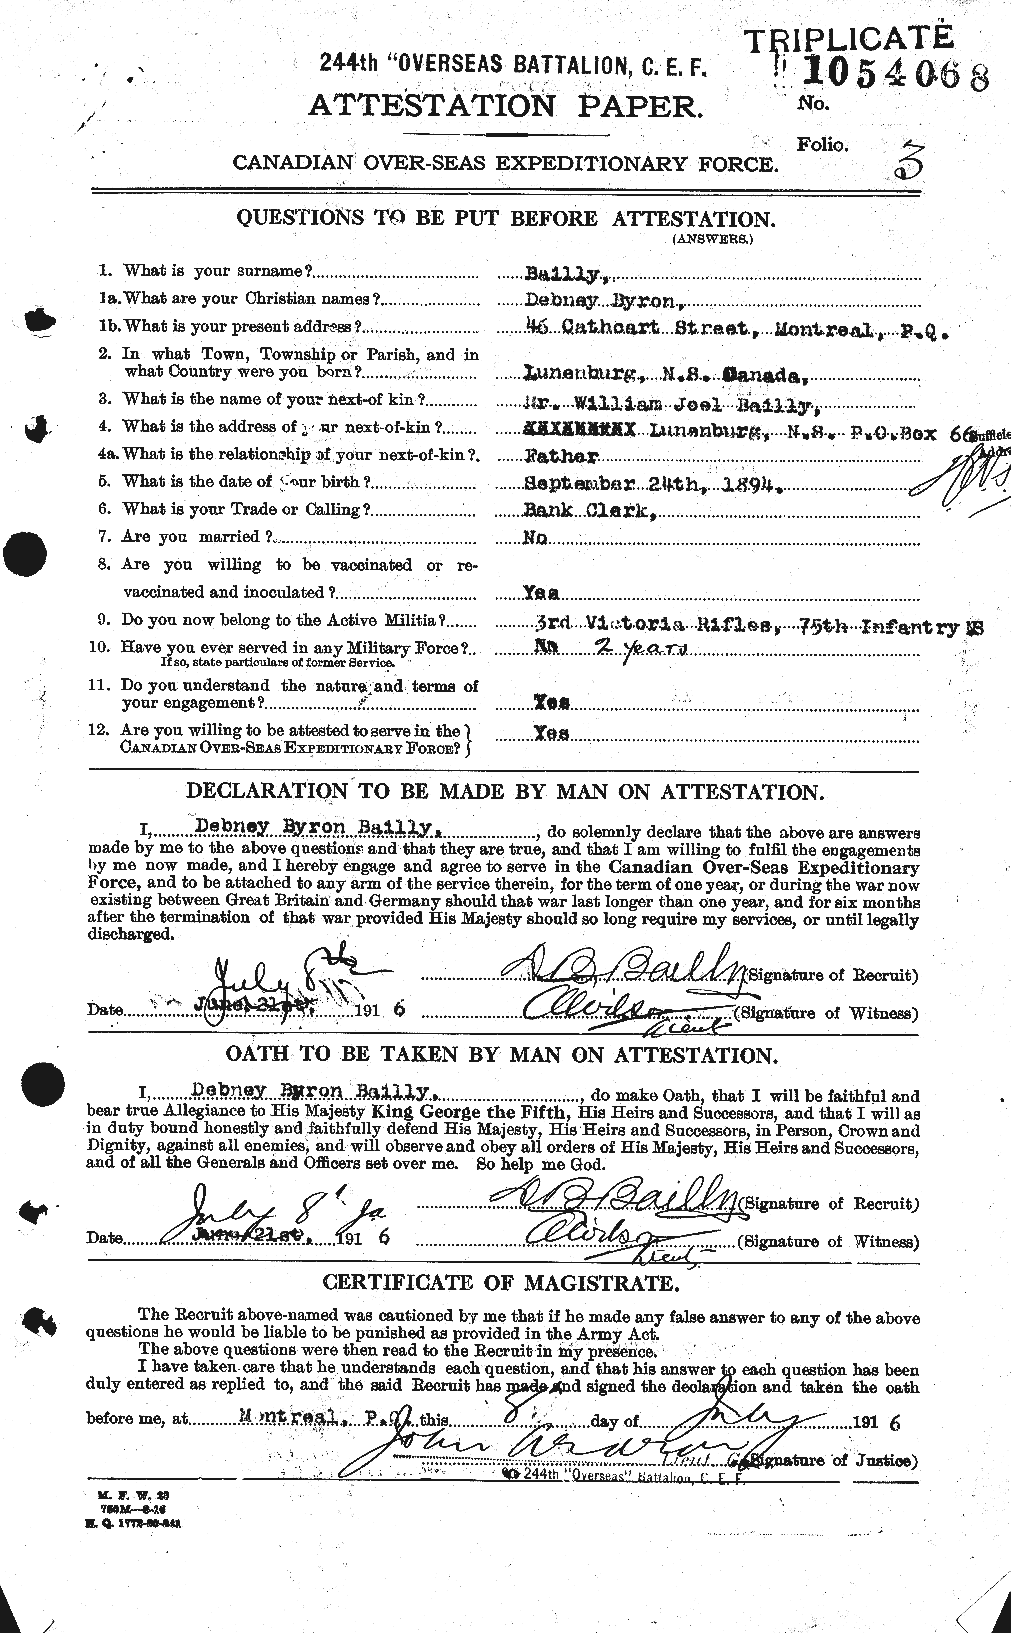 Personnel Records of the First World War - CEF 226192a